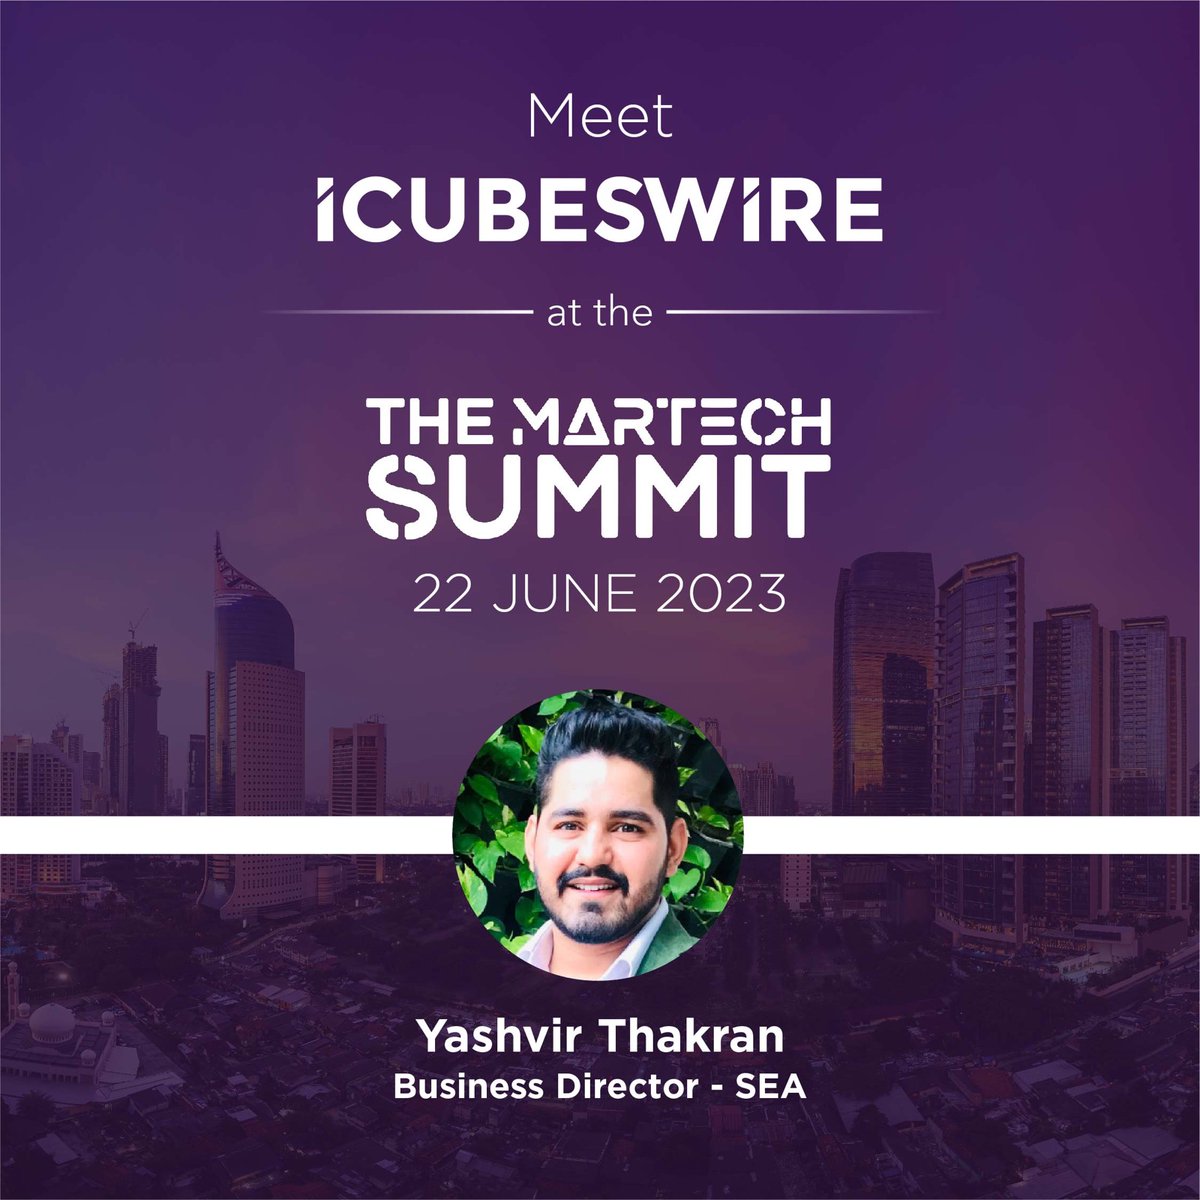 Yashvir from team iCubesWire is all set to attend The MarTech Summit in Jakarta on 22 June 2023. We invite you for meaningful and enlightening discussions about the industry's future.

#themartechsummit #martech #singapore #martech23 #singaporesummit #marketing #icubeswire